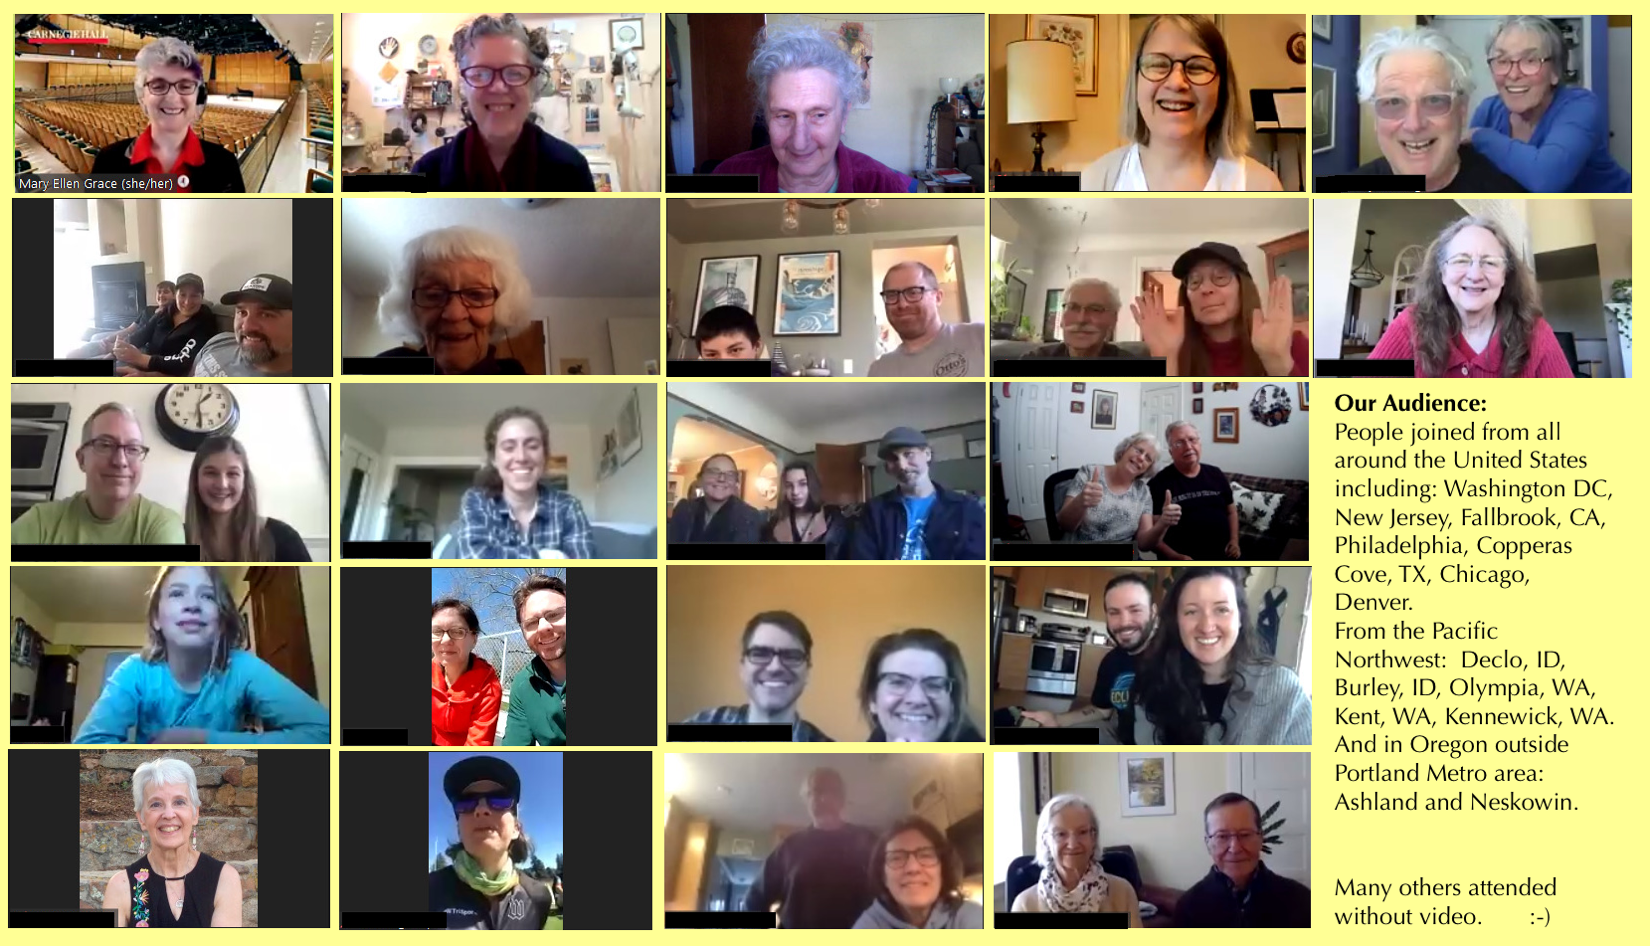 This is a compilation image of our audience who joined from across the United States.